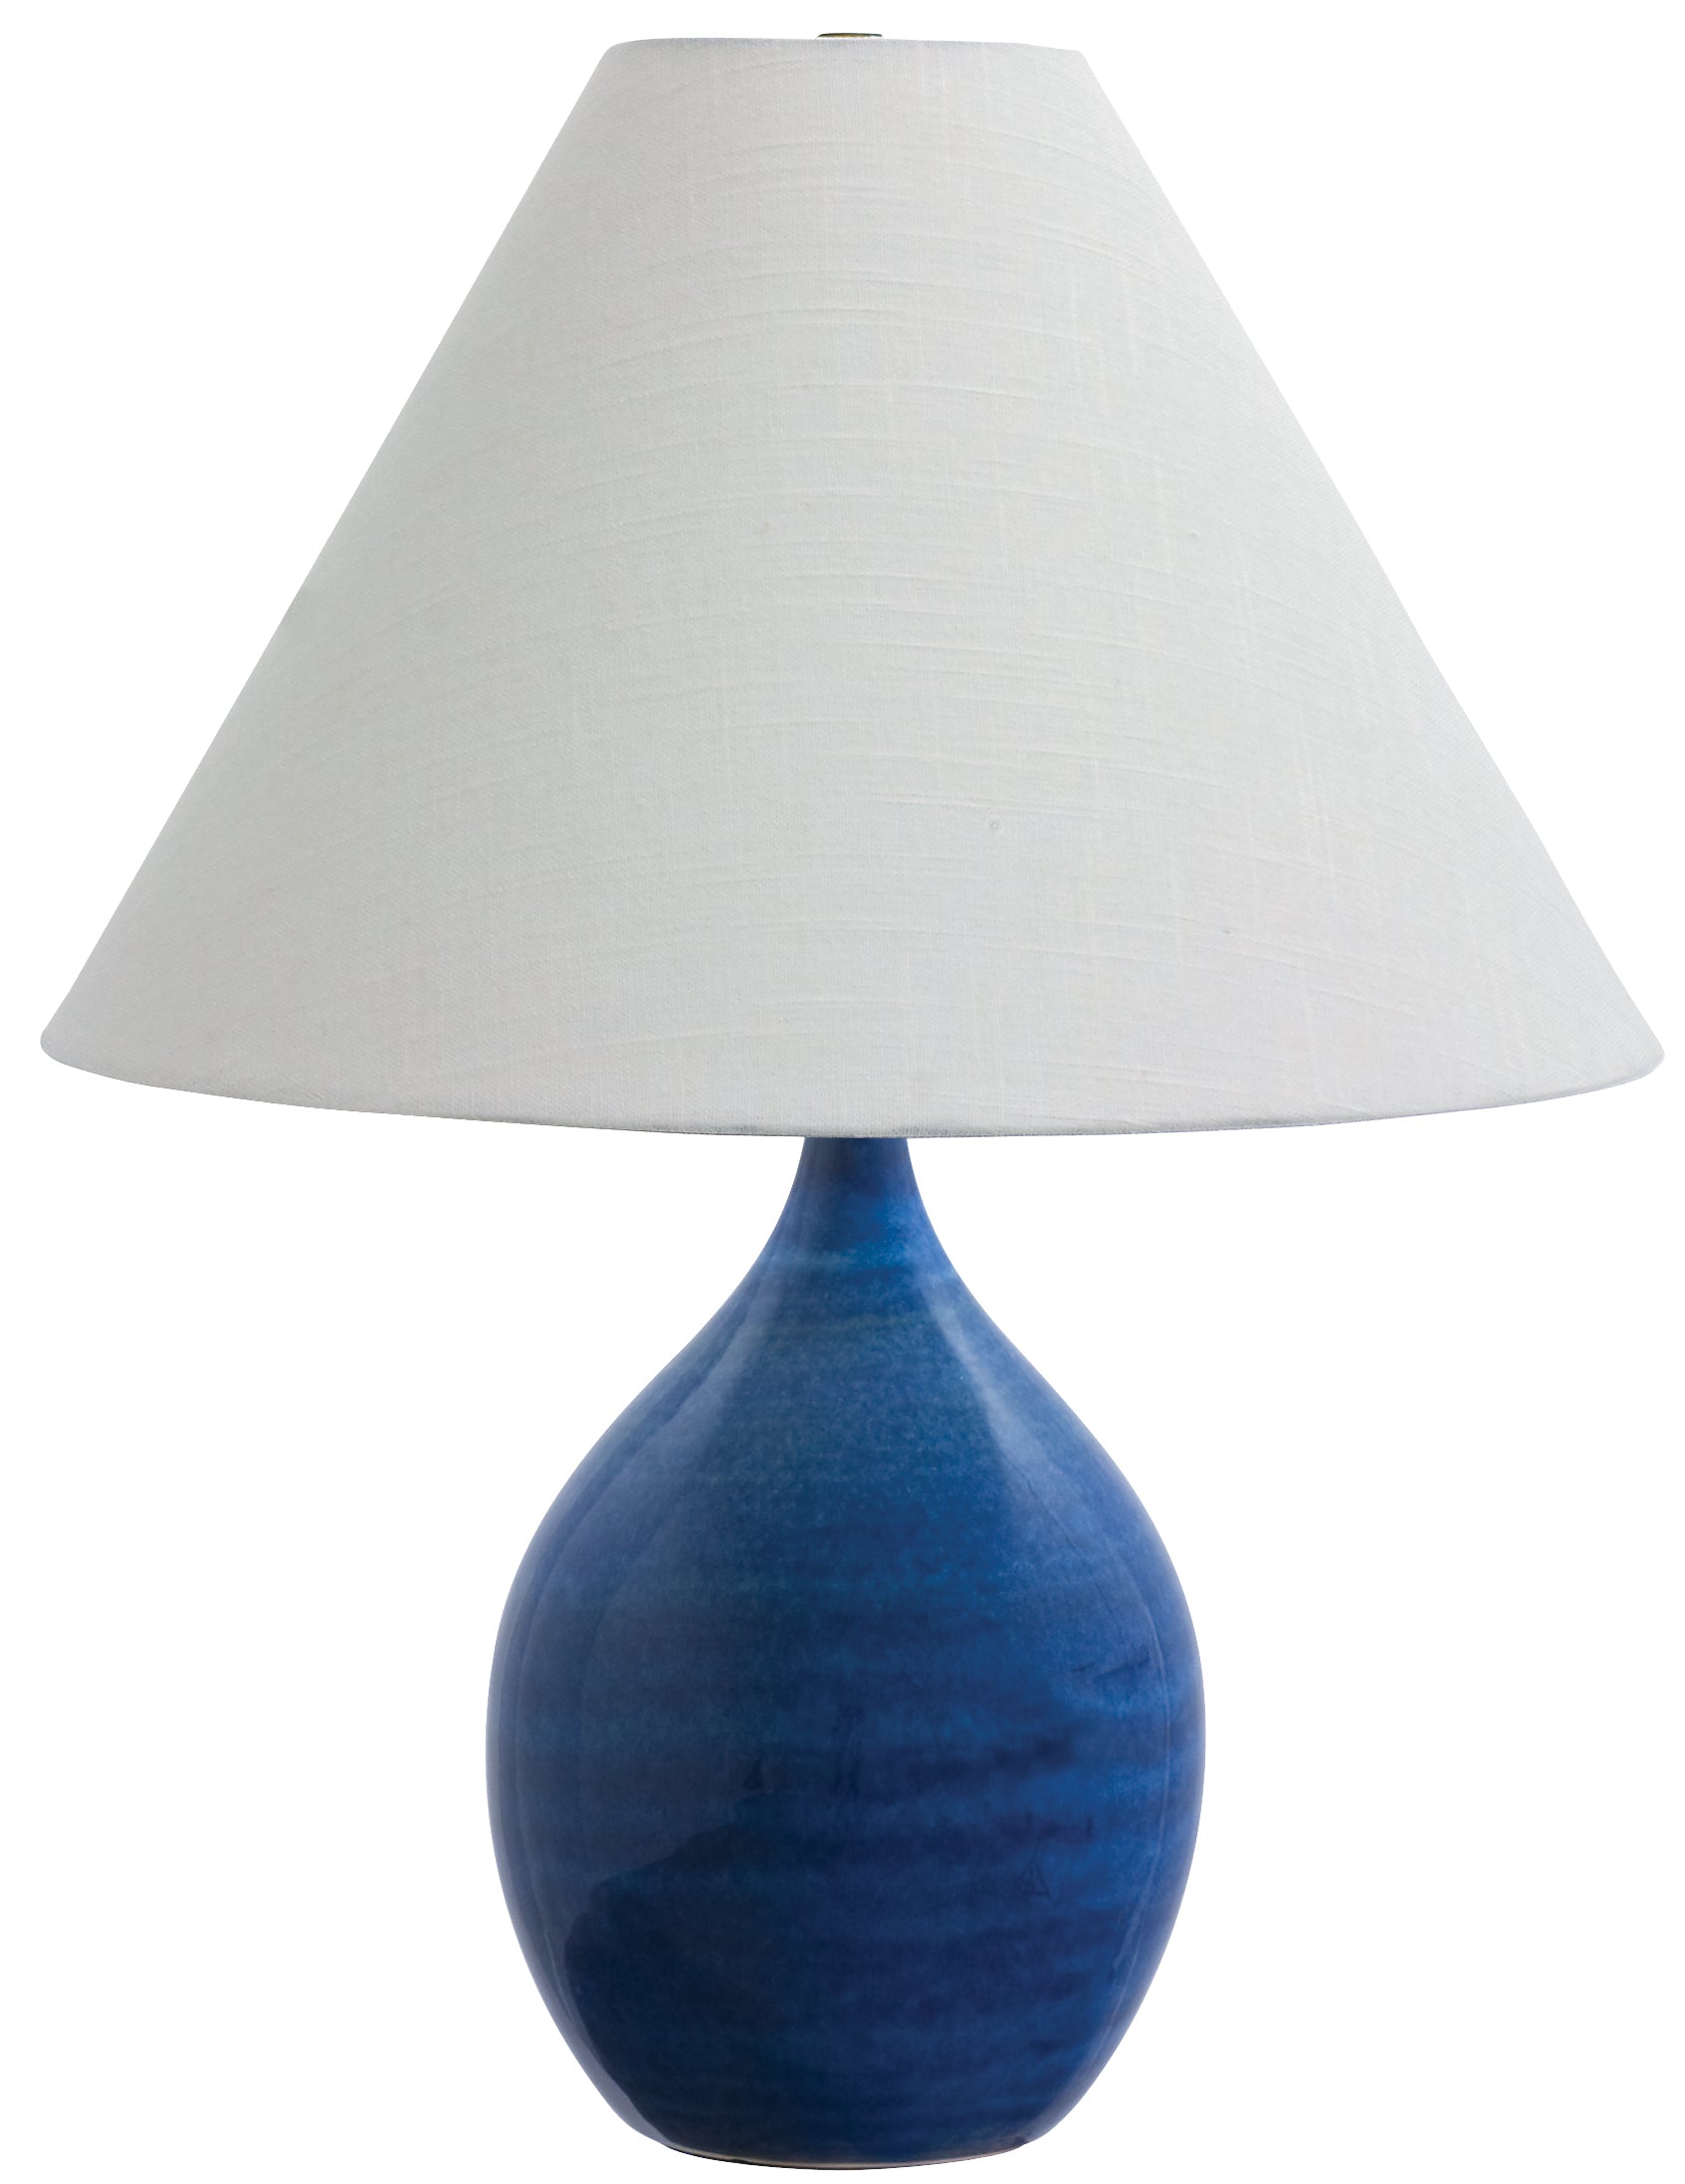 House of Troy Scatchard 22.5" Stoneware Table Lamp in Blue Gloss GS300-BG